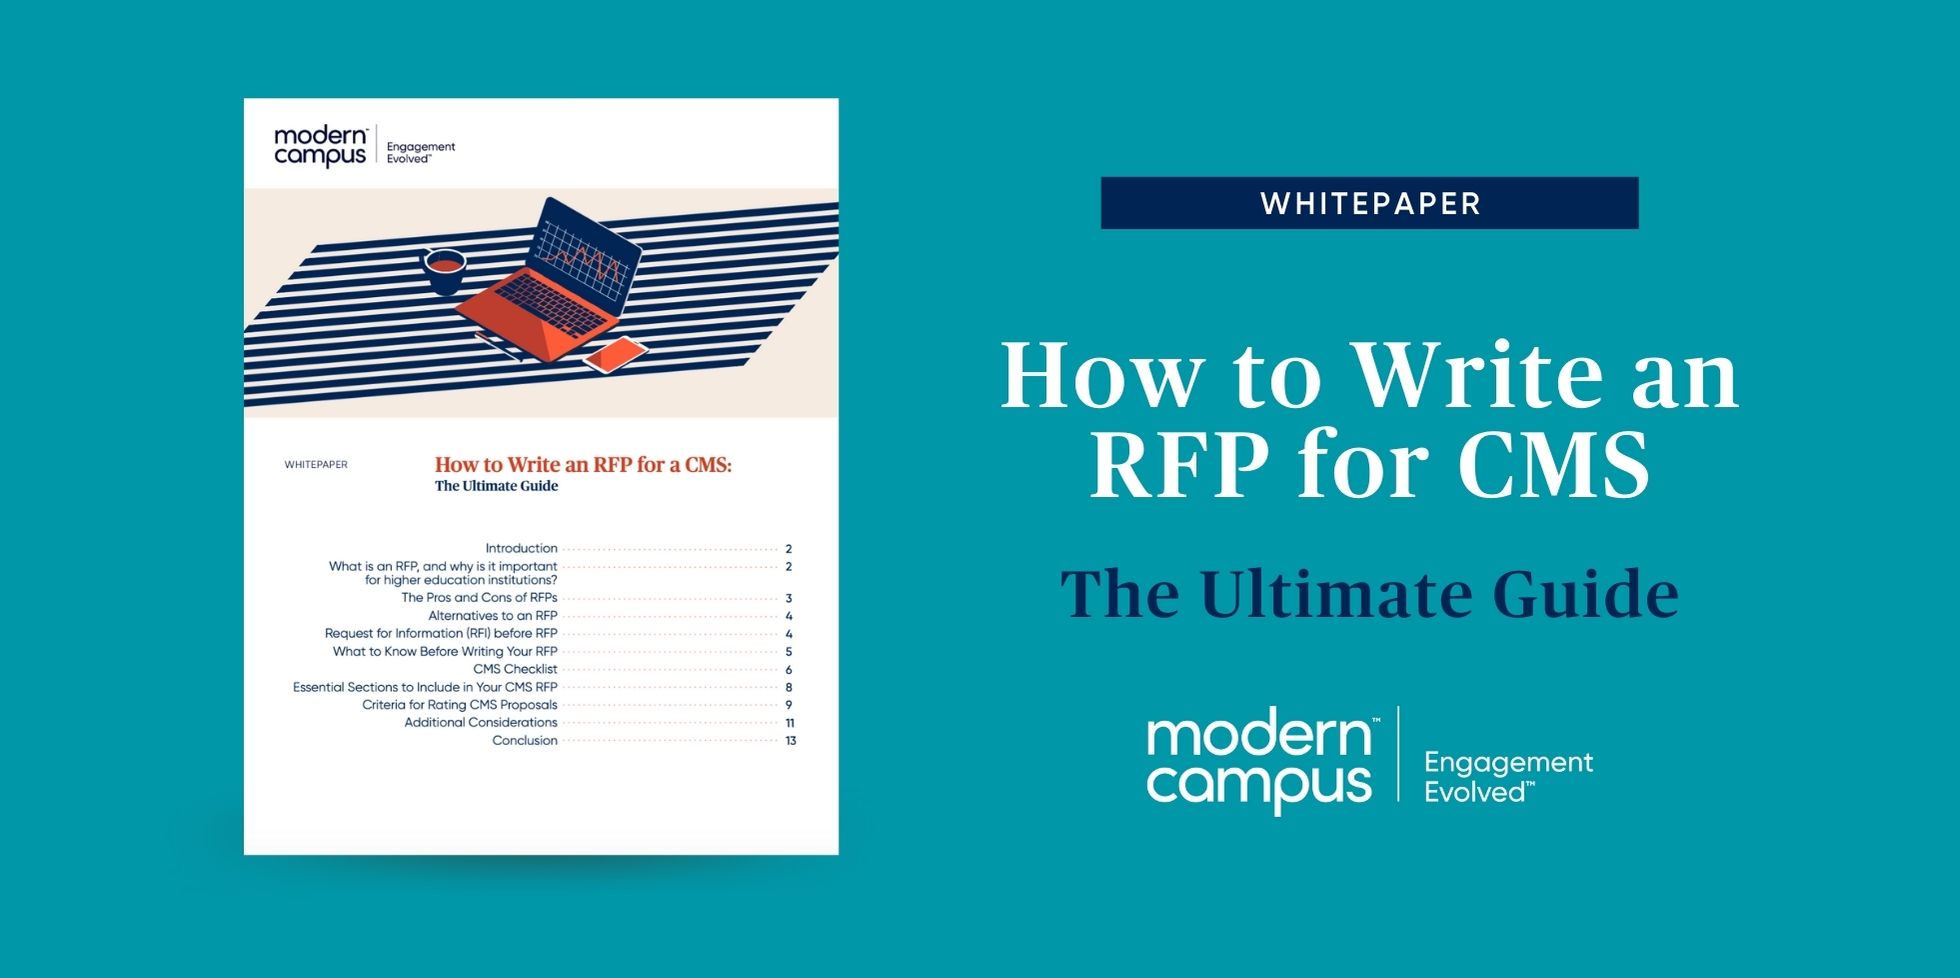 Download our ultimate guide now!